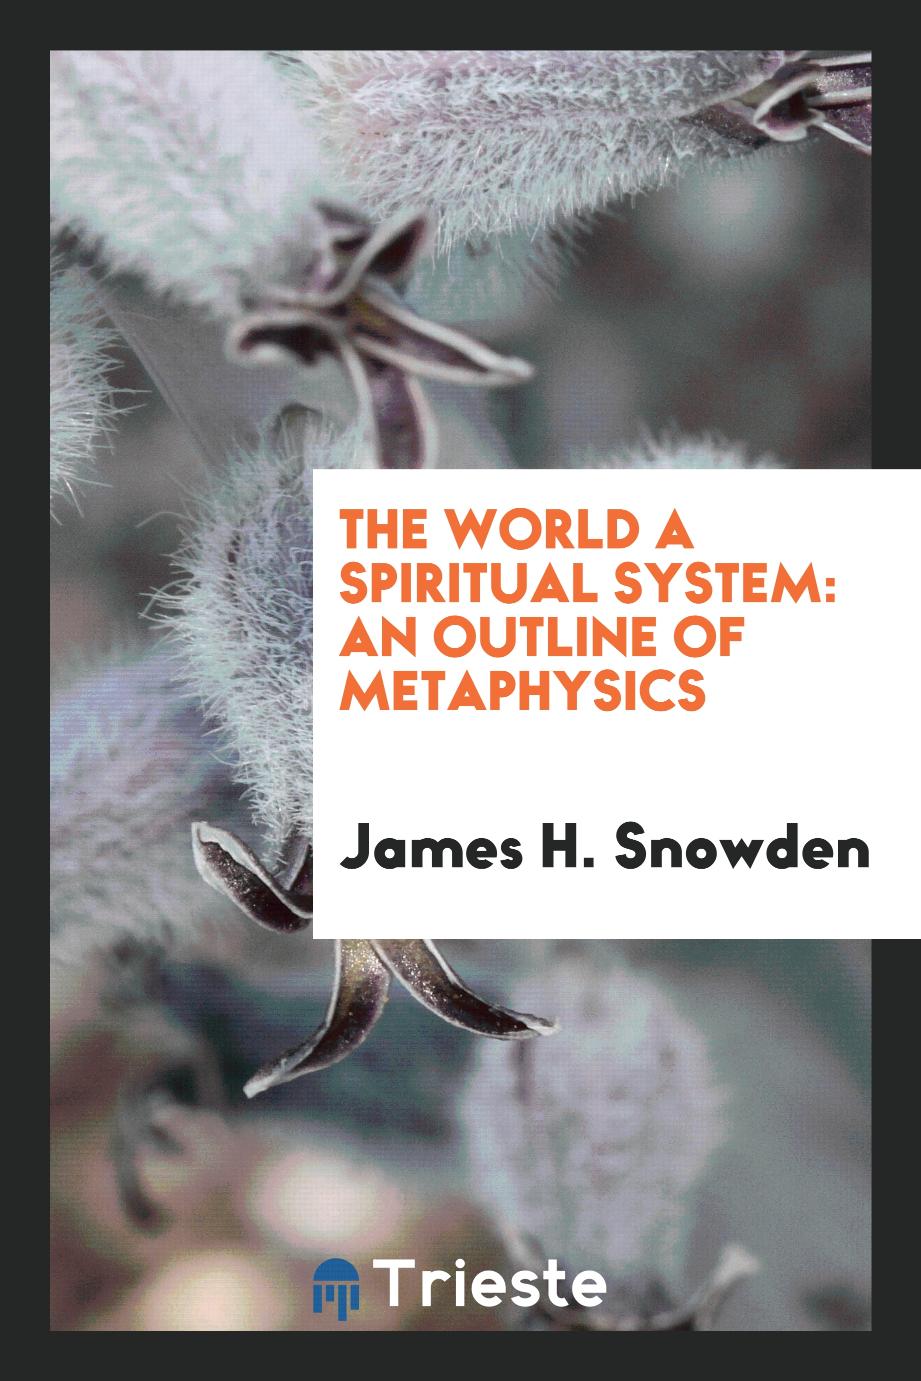 The World a Spiritual System: An Outline of Metaphysics